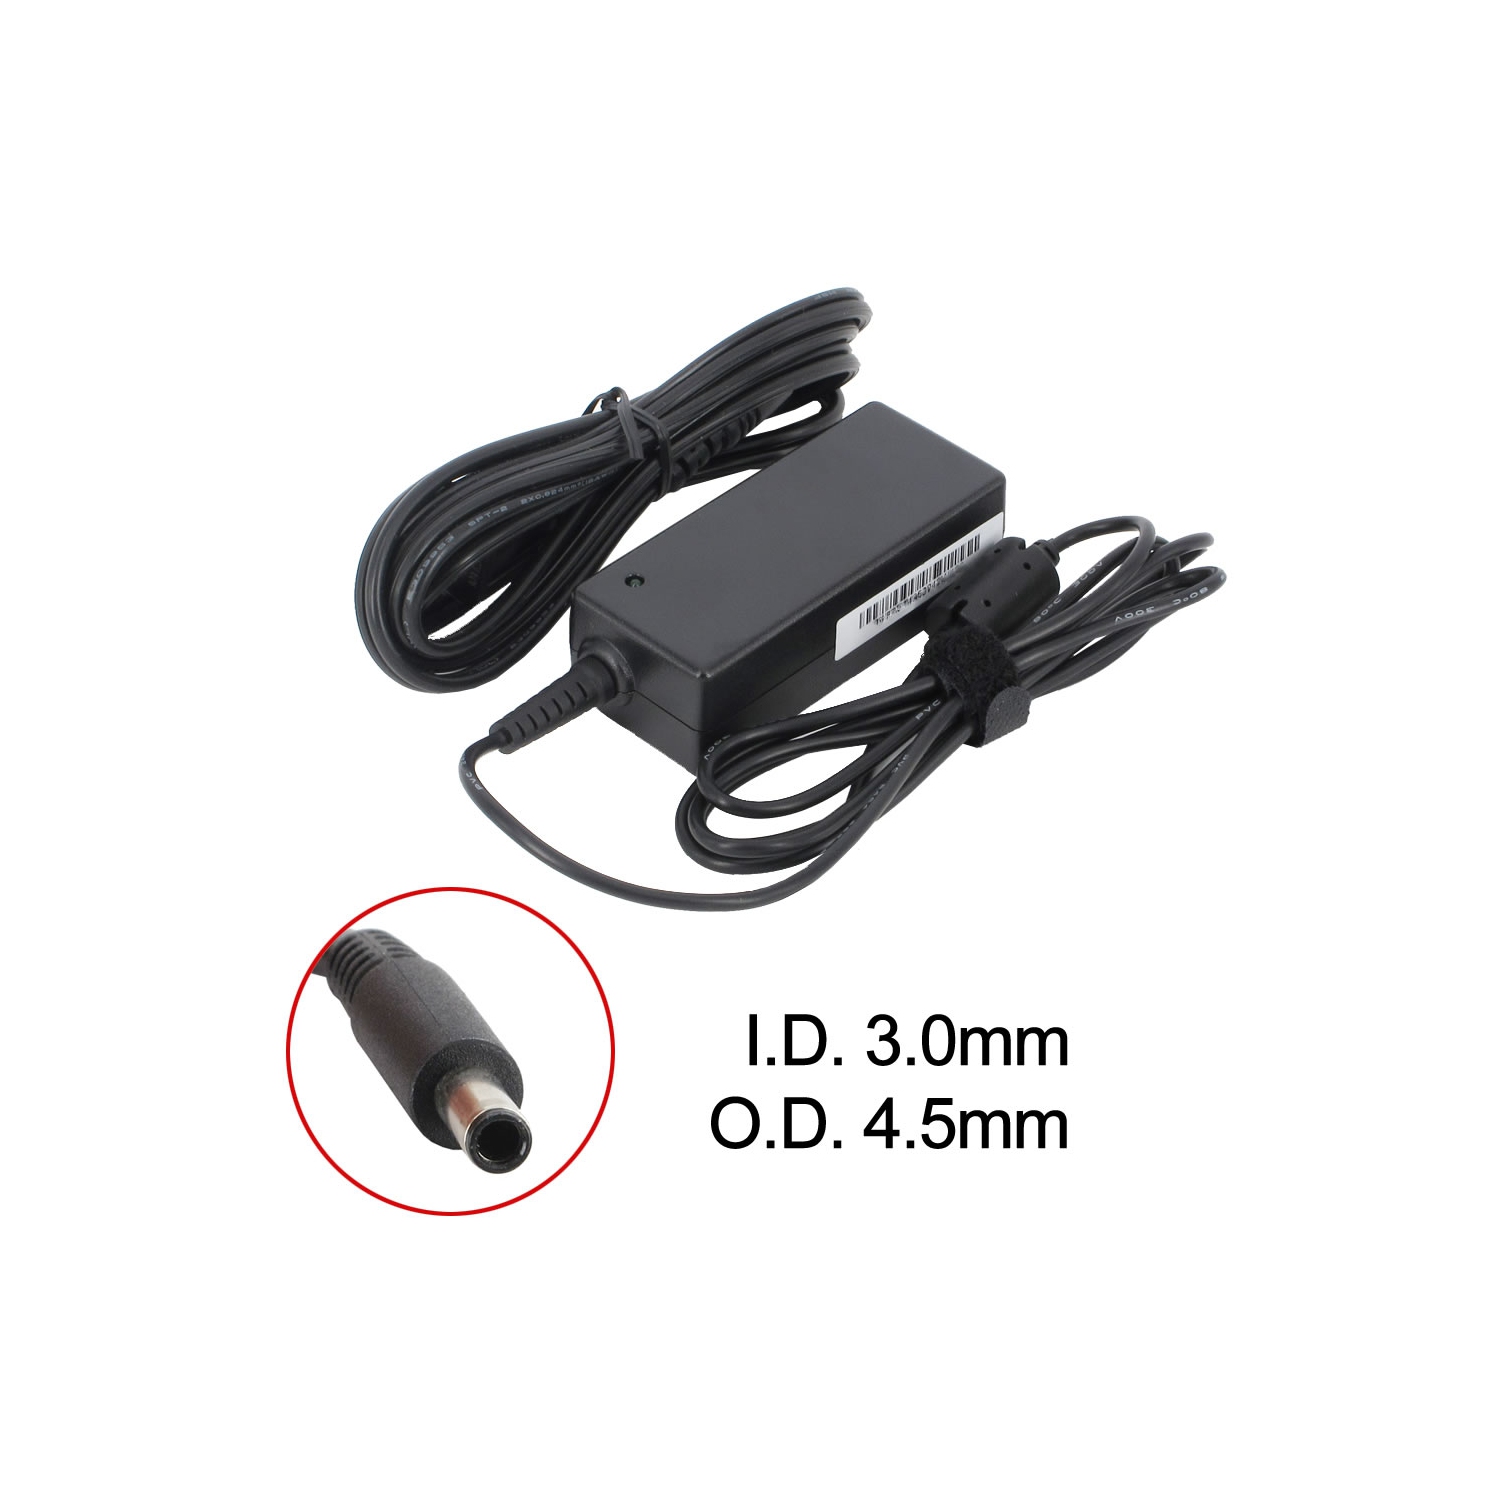 BattDepot: New Replacement Laptop AC Adapter for Dell XPS 12 9Q33, 3RG0T, 450-18463, LA45NM121, PA-1450-66D1